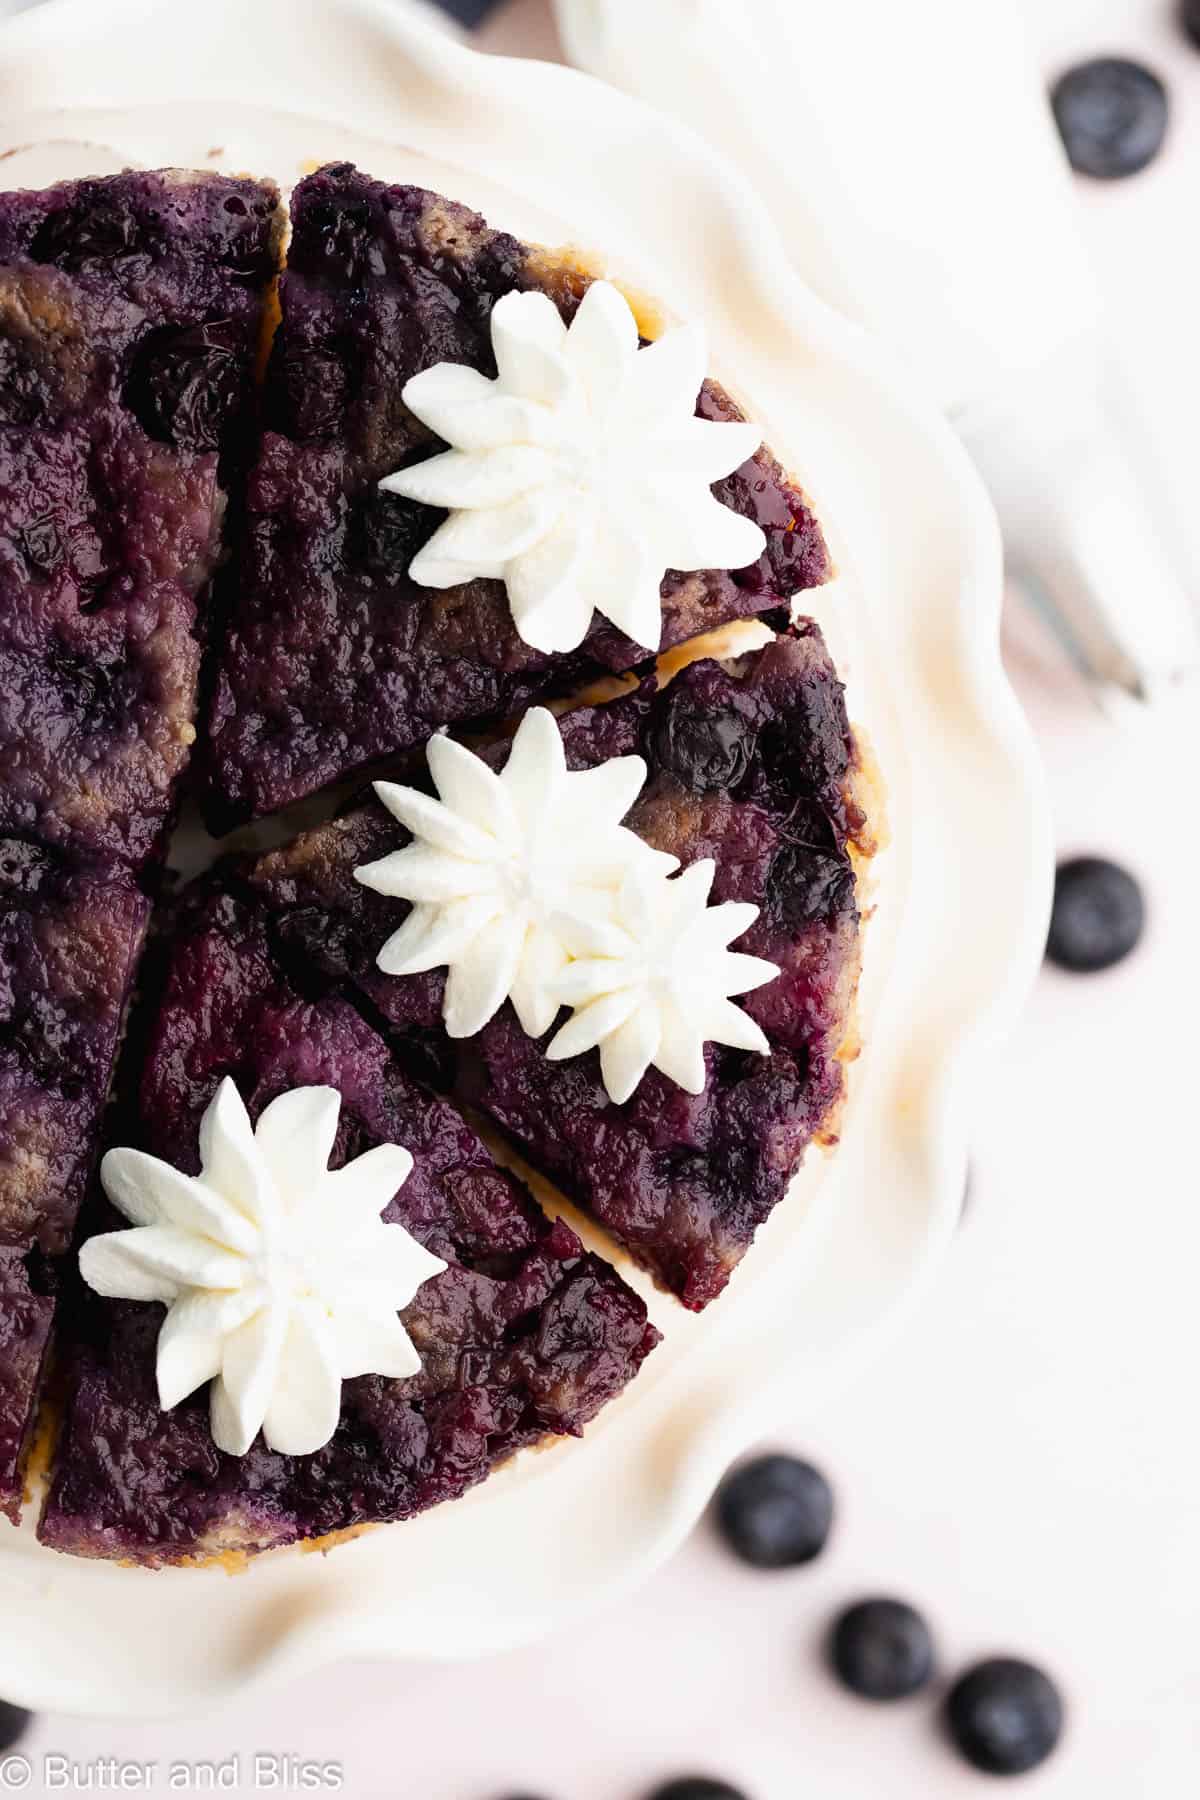 Pretty top view of blueberry lemon upside down cake topped with whipped cream stars.